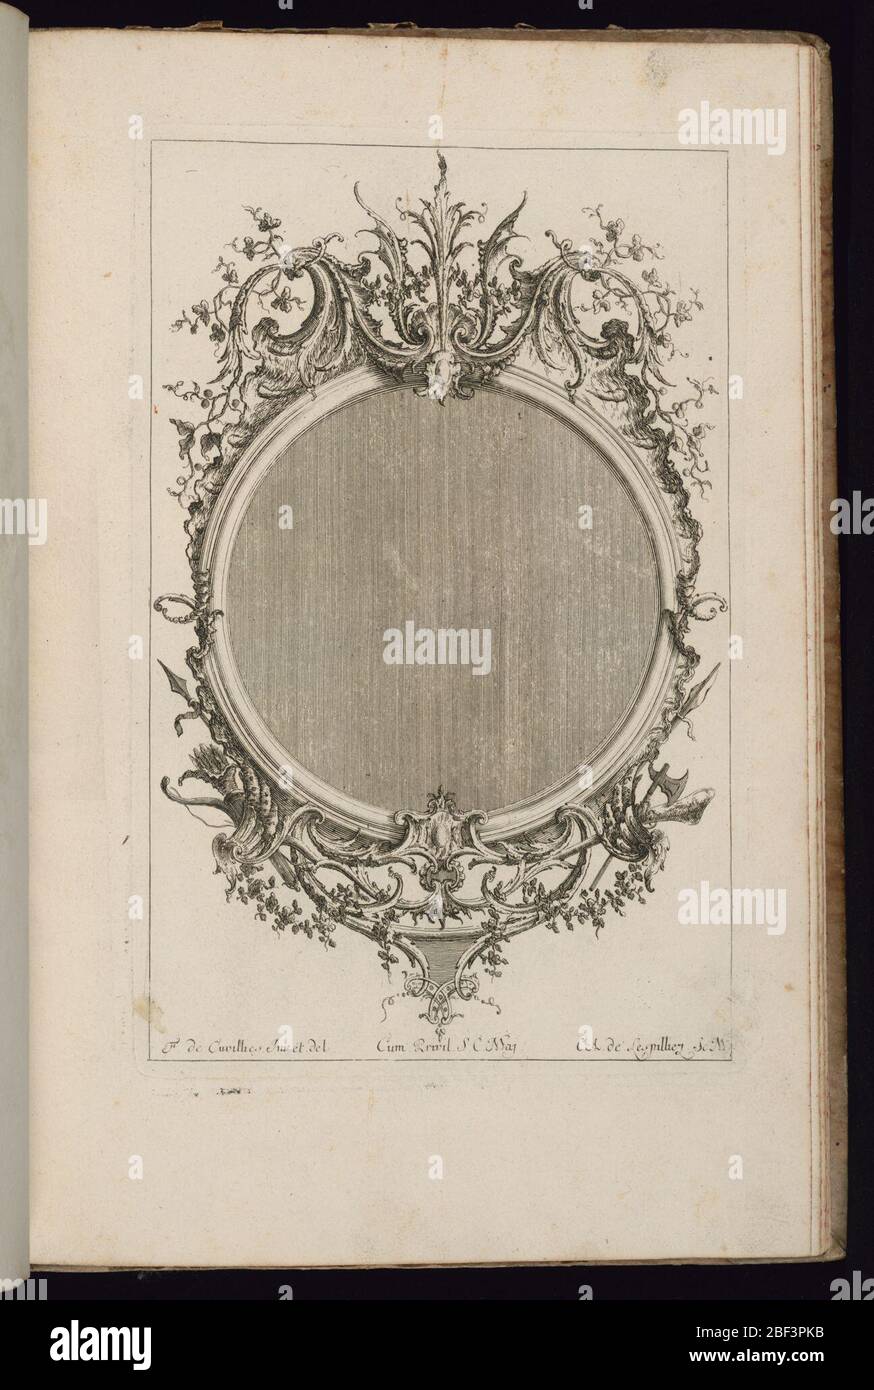 Frame with Two Scrolls of Leaves Troisime Livre de Cadres Third Book of Frames. Upright frame design for a mirror or painting, circular form, topped by two scrolls of leaves. Weaponhs at lower left and right, vegetal decoration throughout. Stock Photo